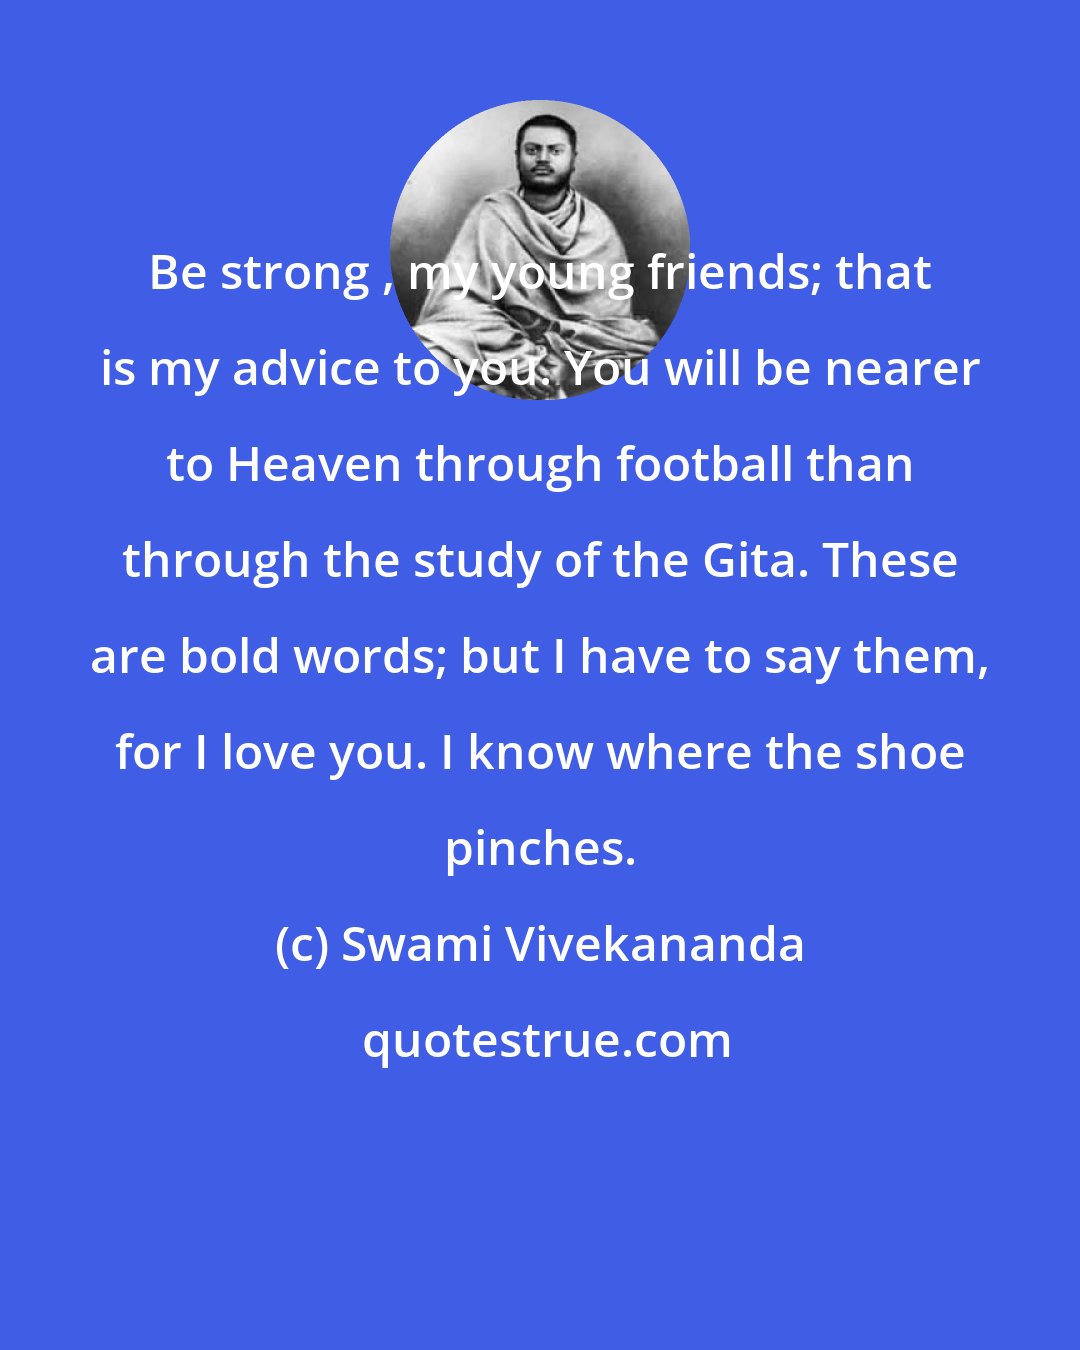 Swami Vivekananda: Be strong , my young friends; that is my advice to you. You will be nearer to Heaven through football than through the study of the Gita. These are bold words; but I have to say them, for I love you. I know where the shoe pinches.